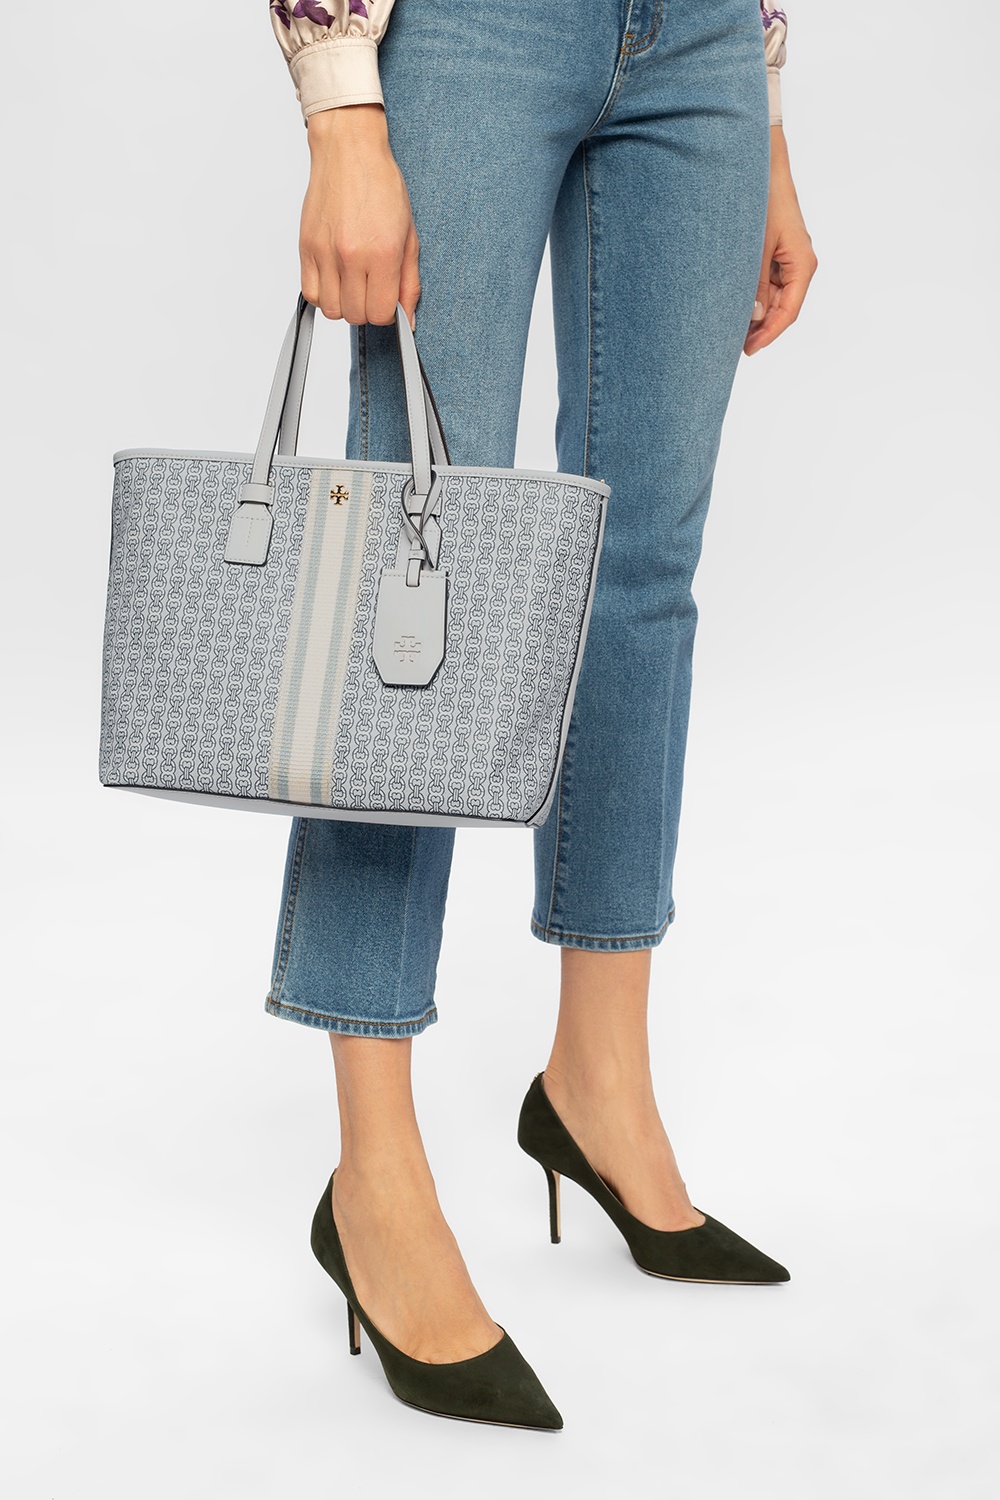 Tory Burch Gemini Link Tote Blue in Leather with Silver-tone - US